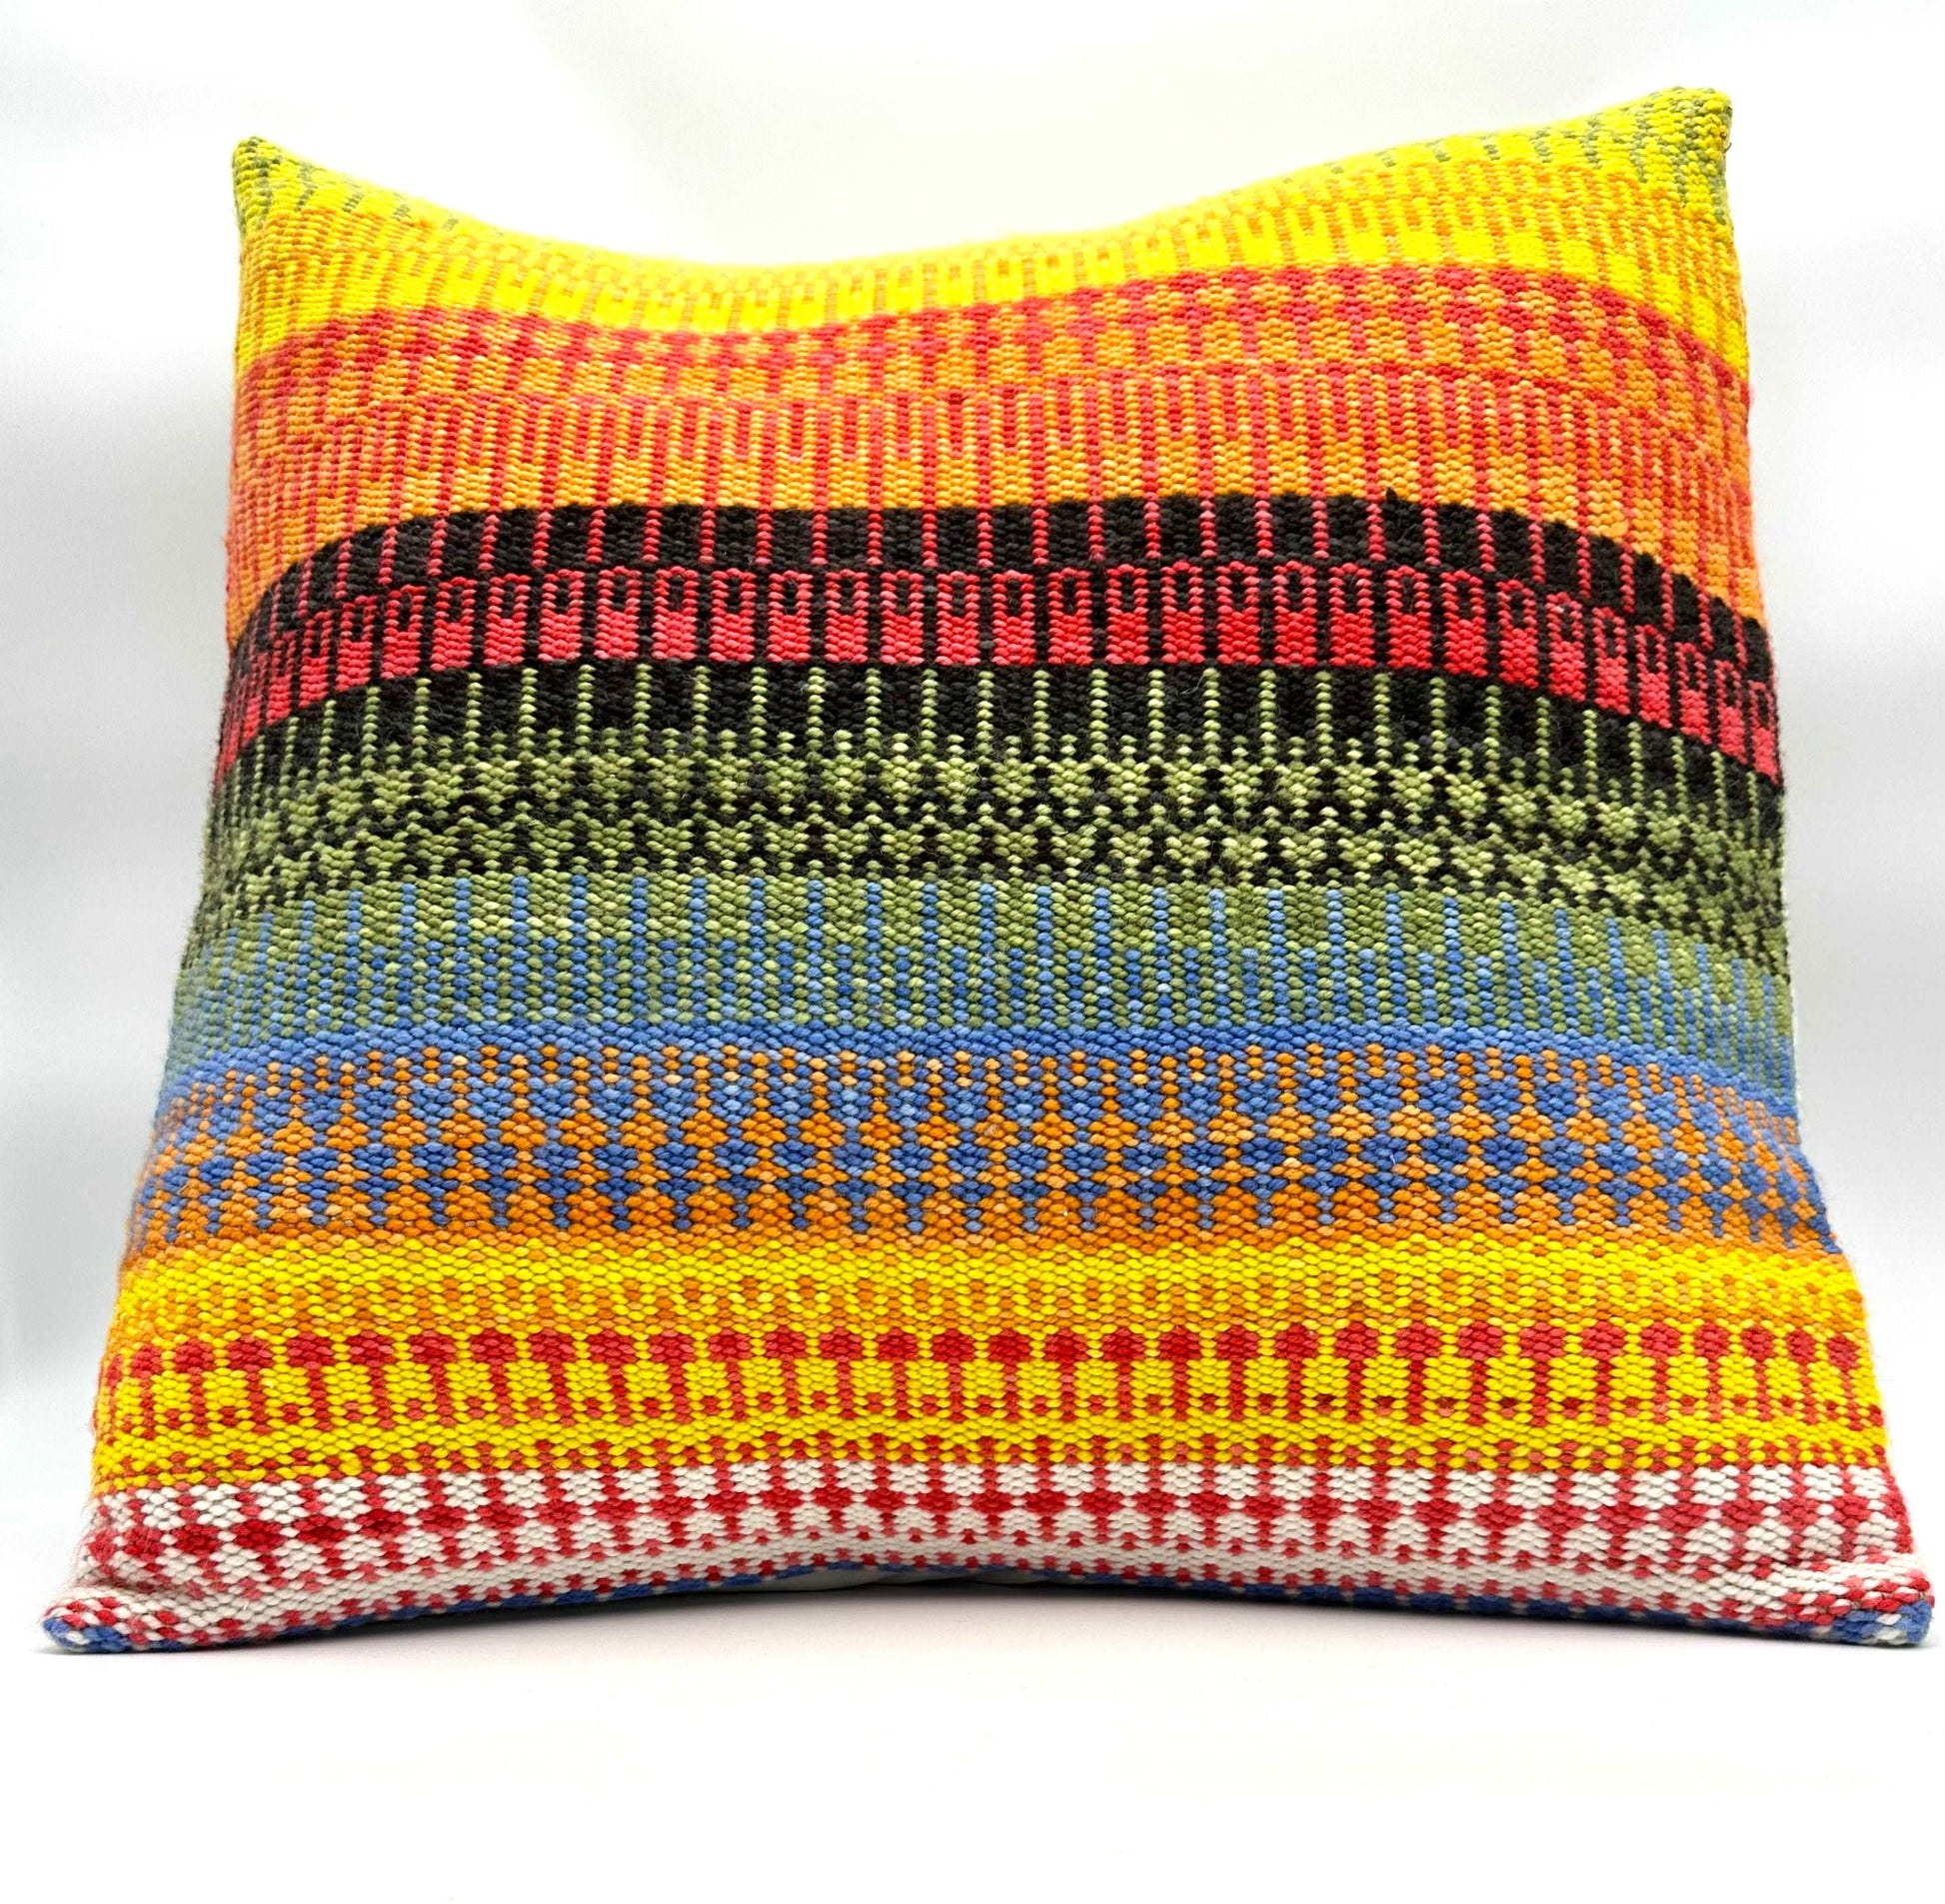 Handwoven throw pillow cover with bright and summer like warm tones of yellow, orange, green and blue